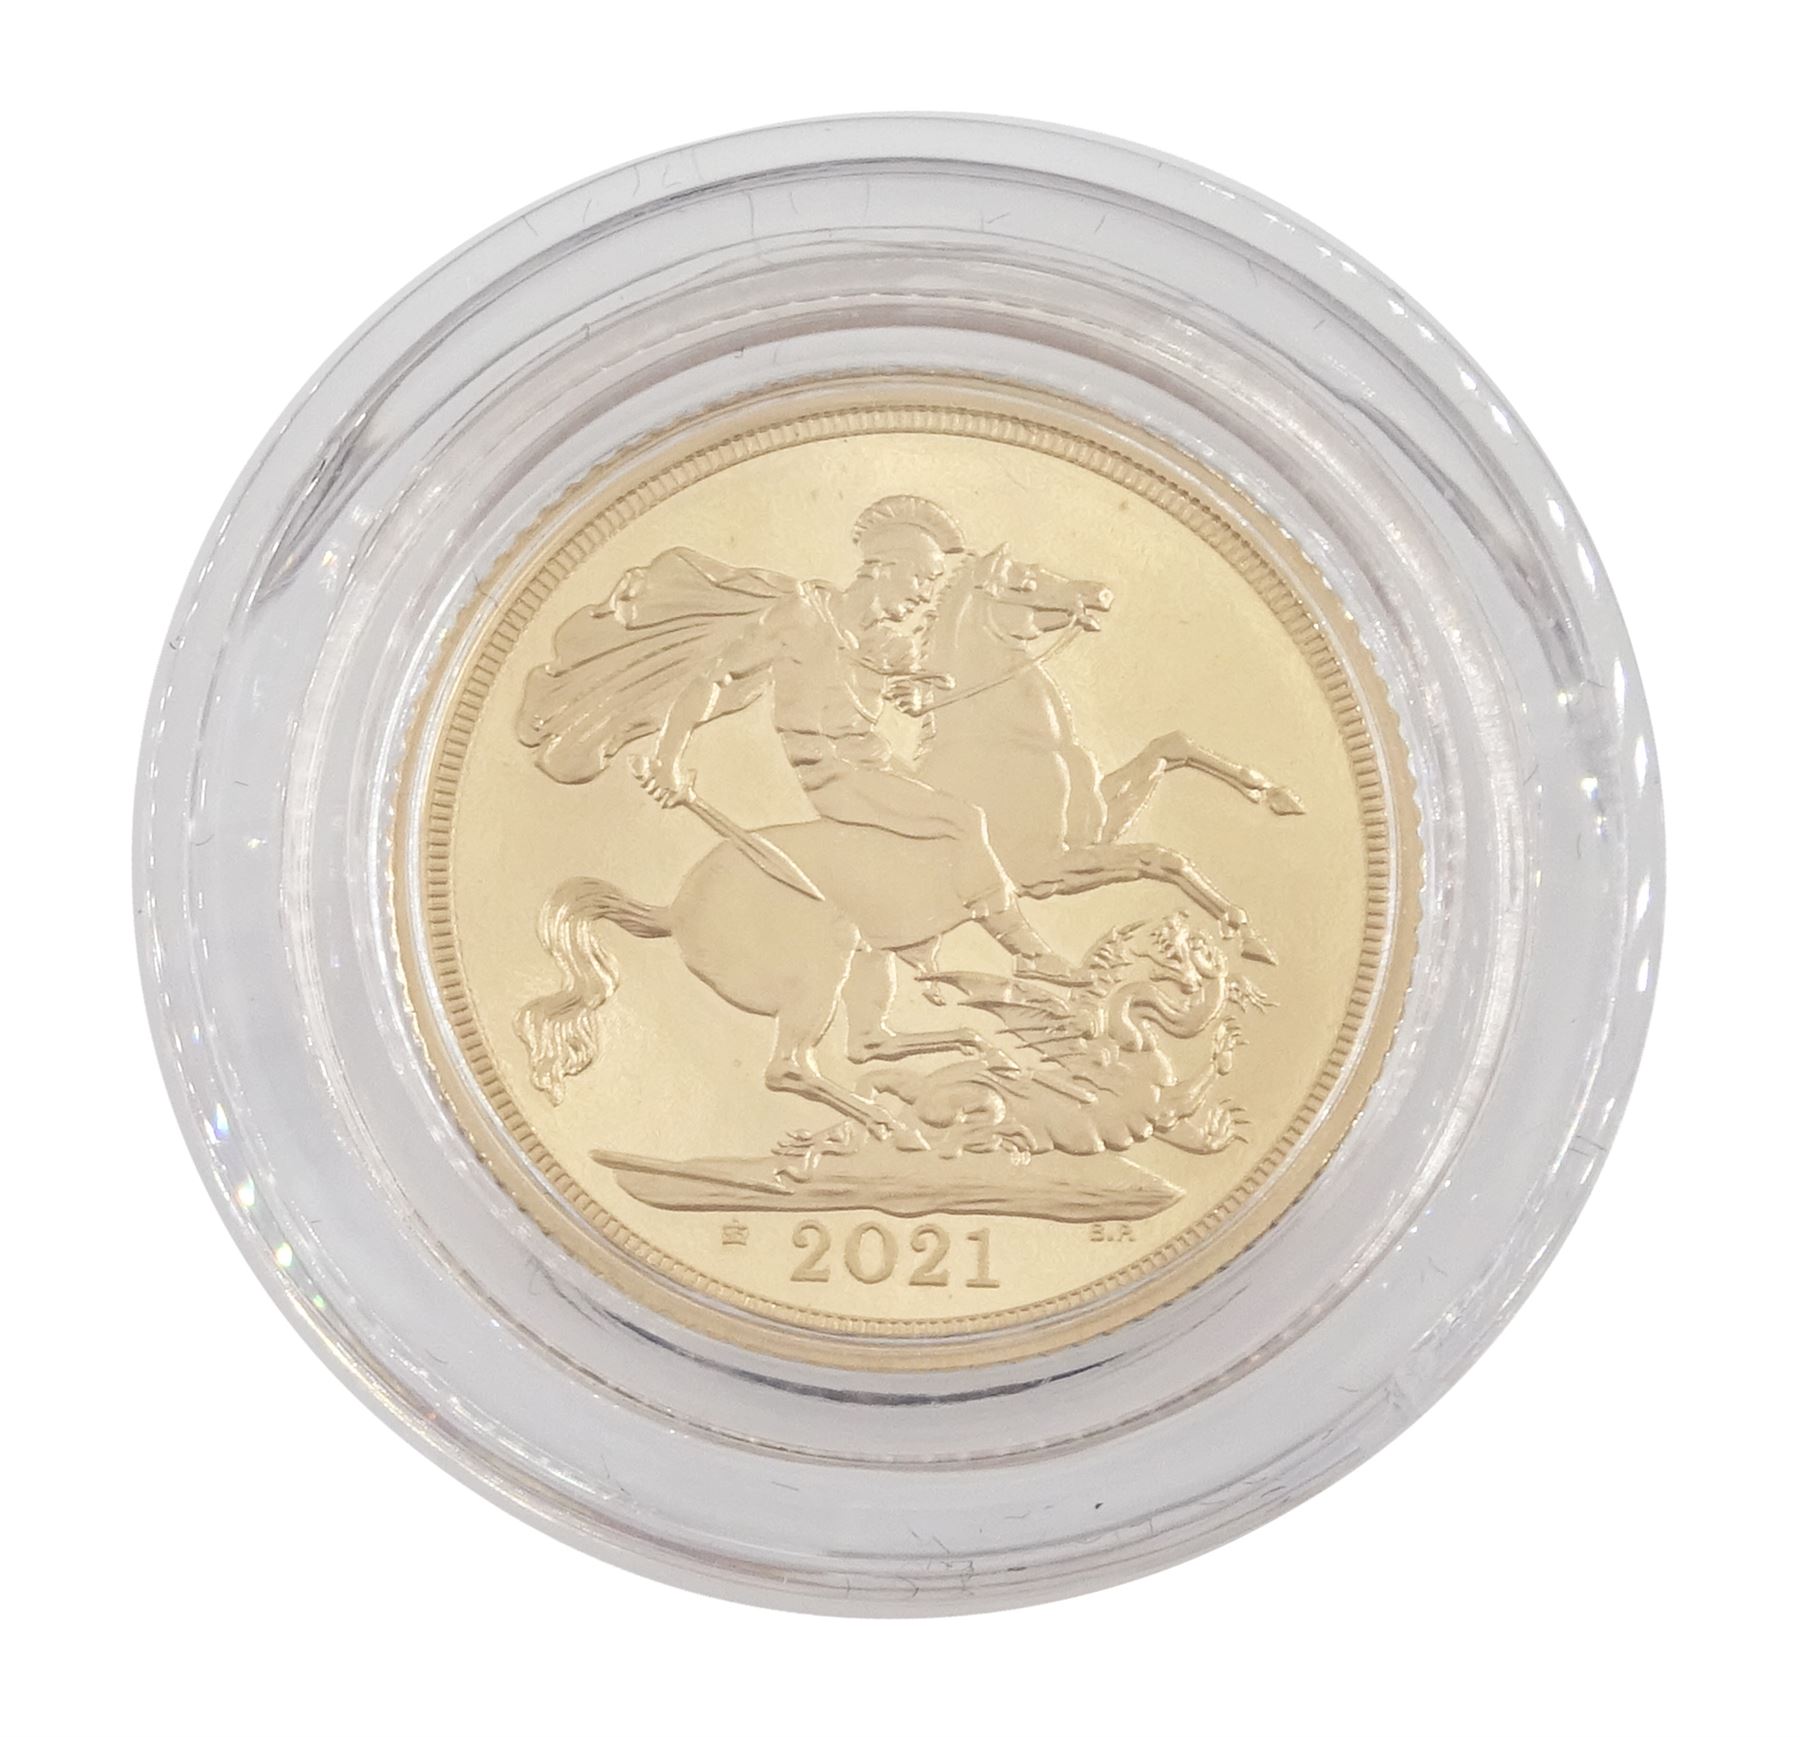 Queen Elizabeth II 2021 gold proof full sovereign coin - Image 3 of 4